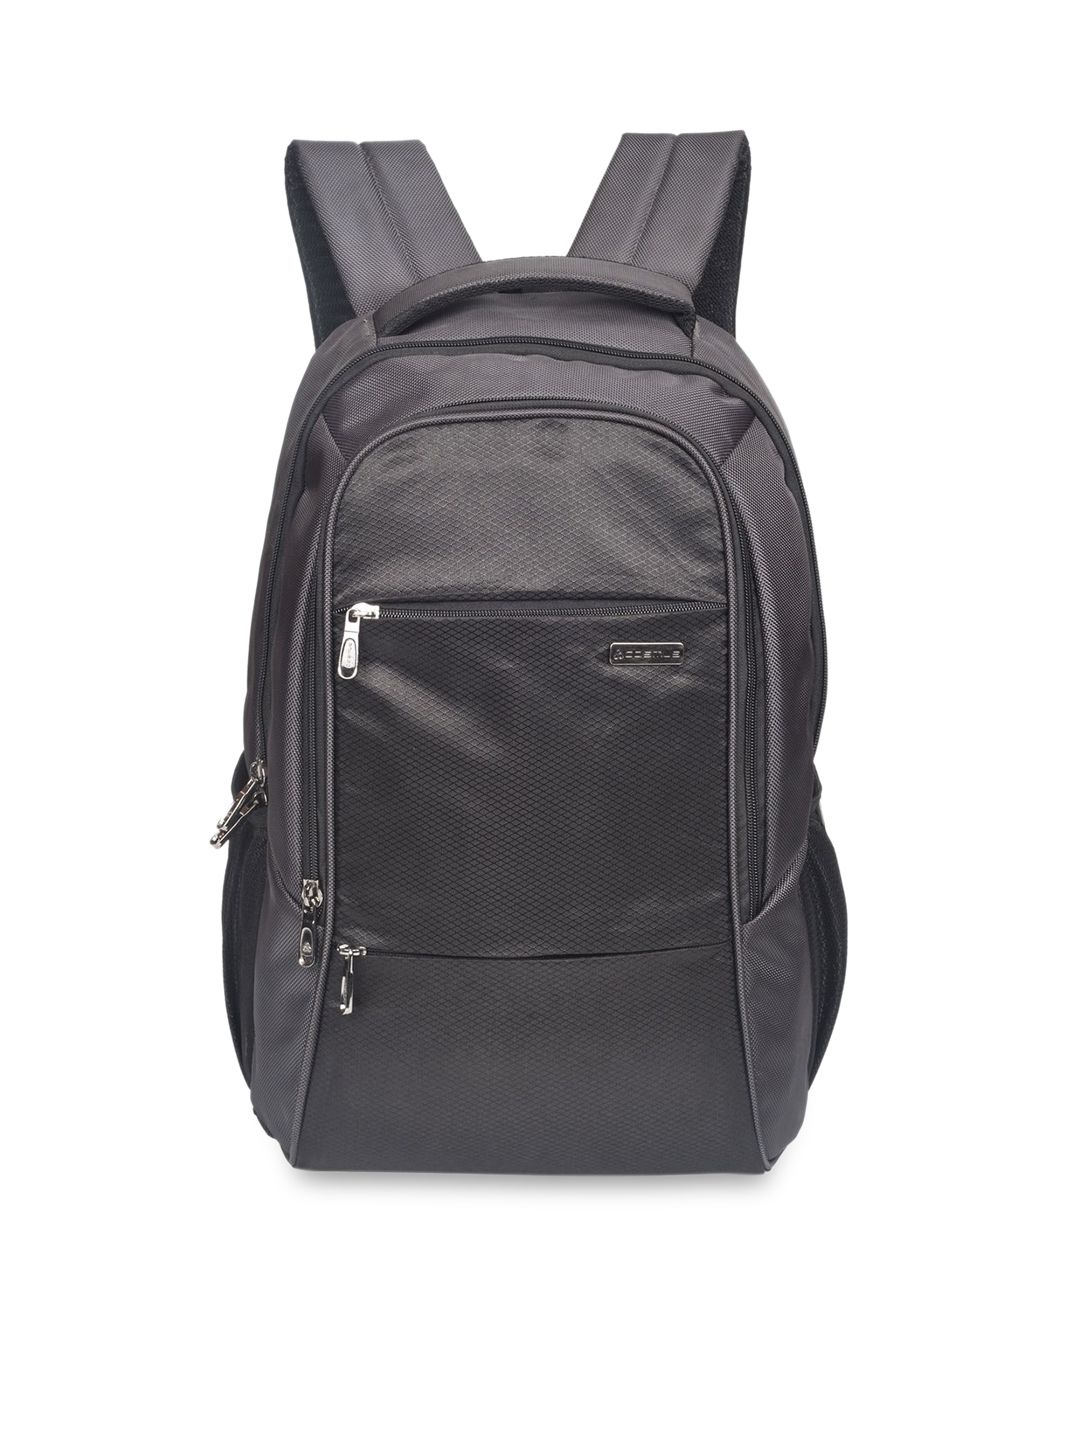 COSMUS Unisex Grey Solid Backpack Price in India